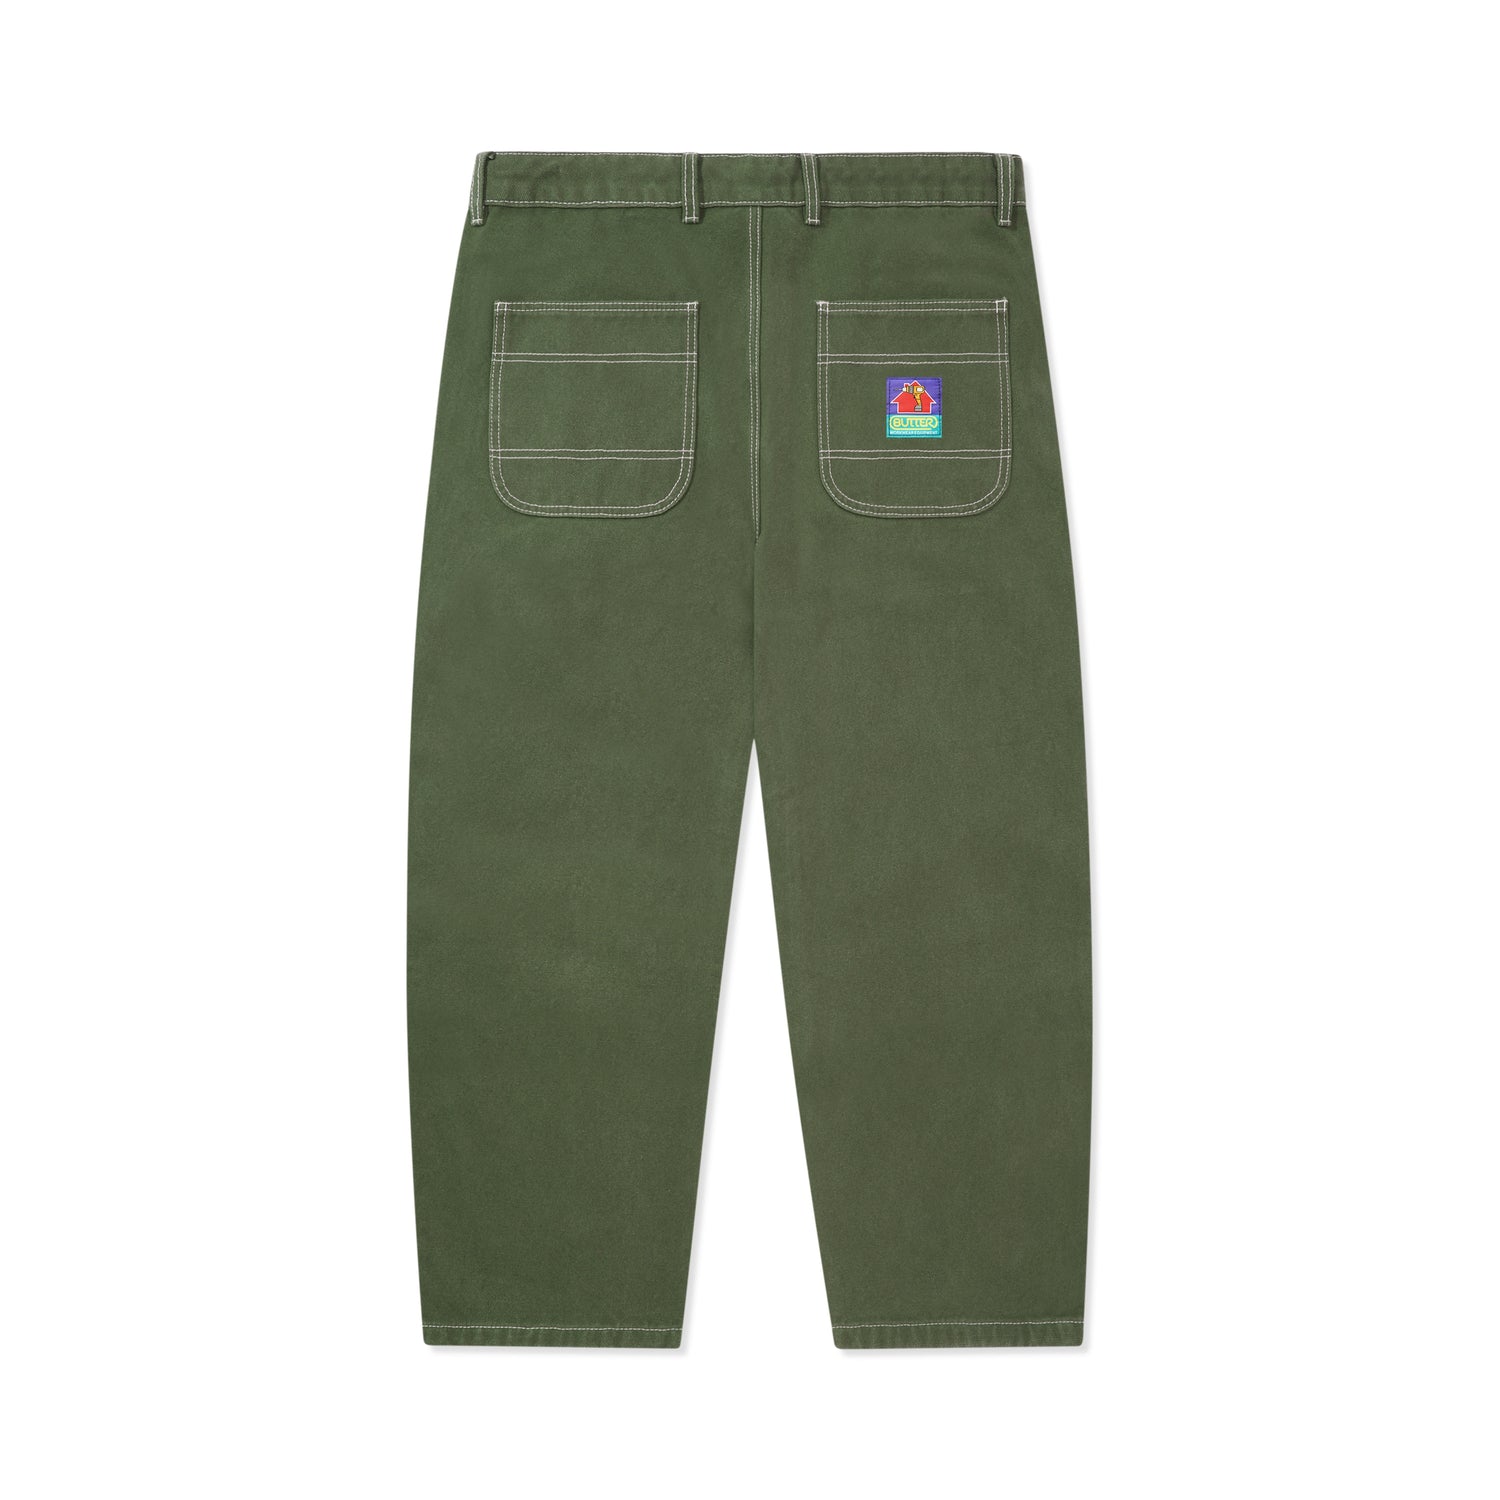 Work Double Knee Pants, Washed Army